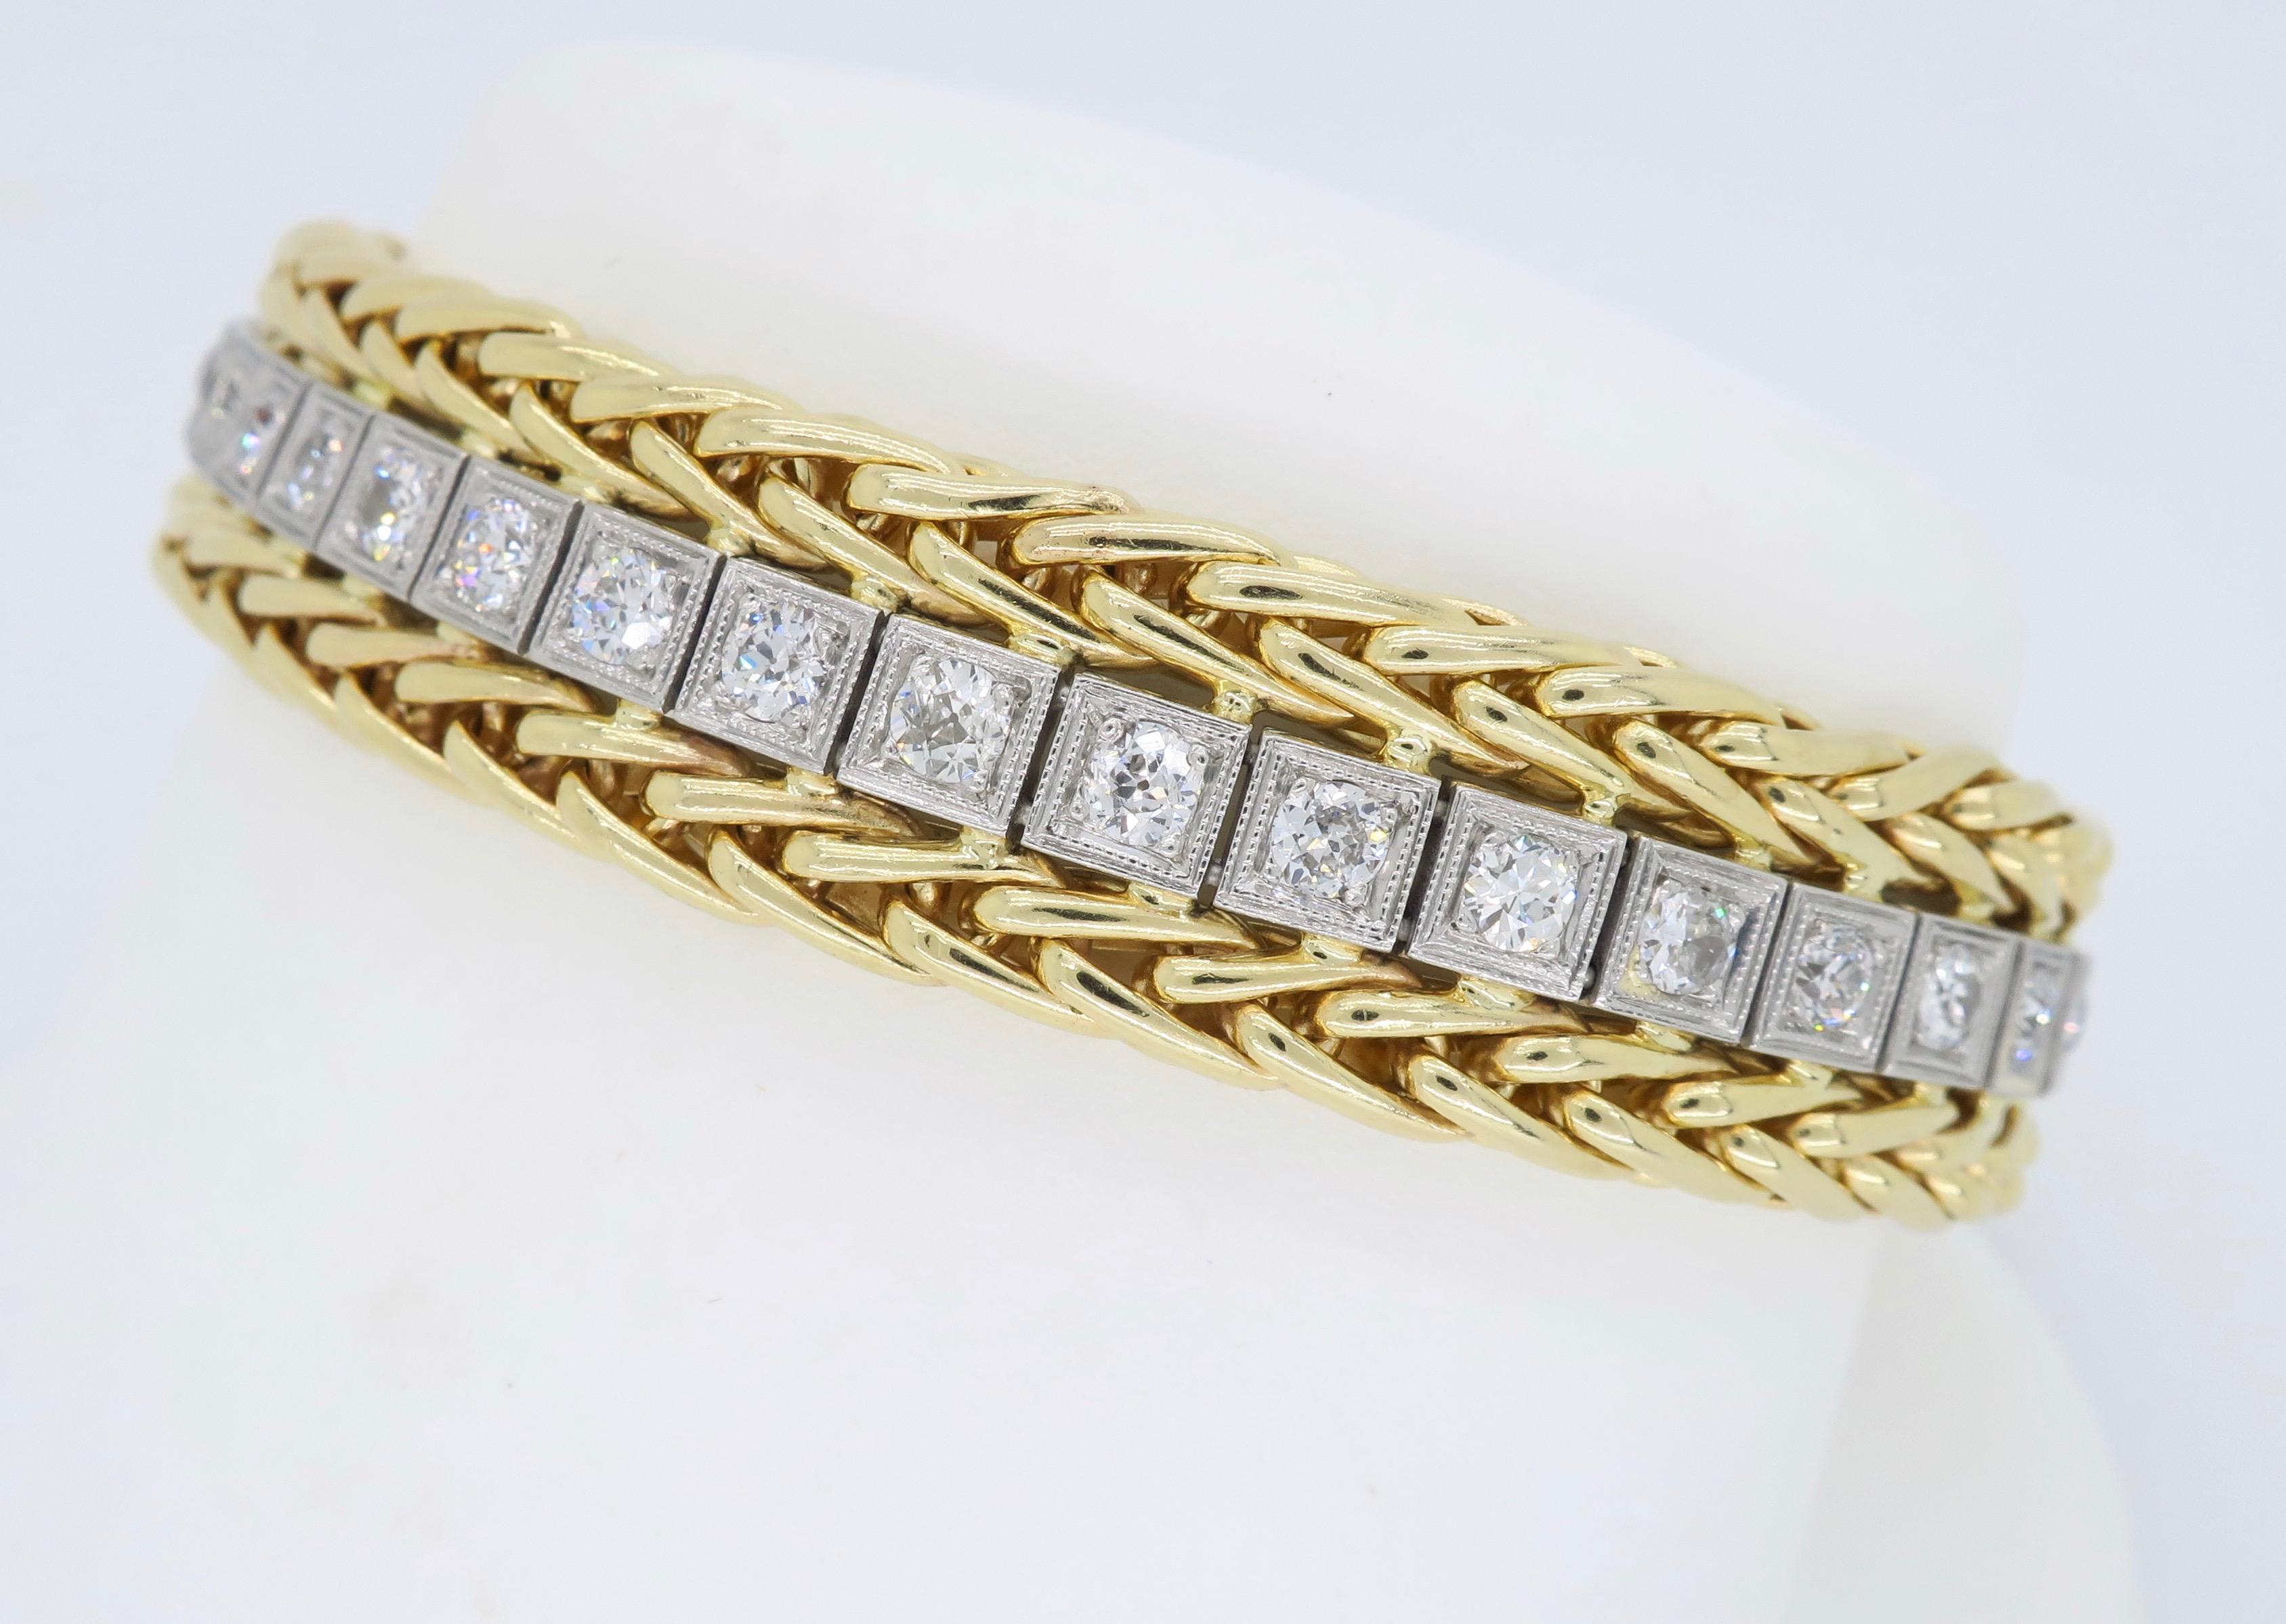 This stunning two tone 14K gold bracelet features approximately 2.50CTW of Old European Cut Diamonds.

Diamond Carat Weight: Approximately 2.50CTW
Diamond Cut: 40 Old European Cut Diamonds
Color: Average F-K
Clarity: Average VS-I
Metal: 14K Yellow